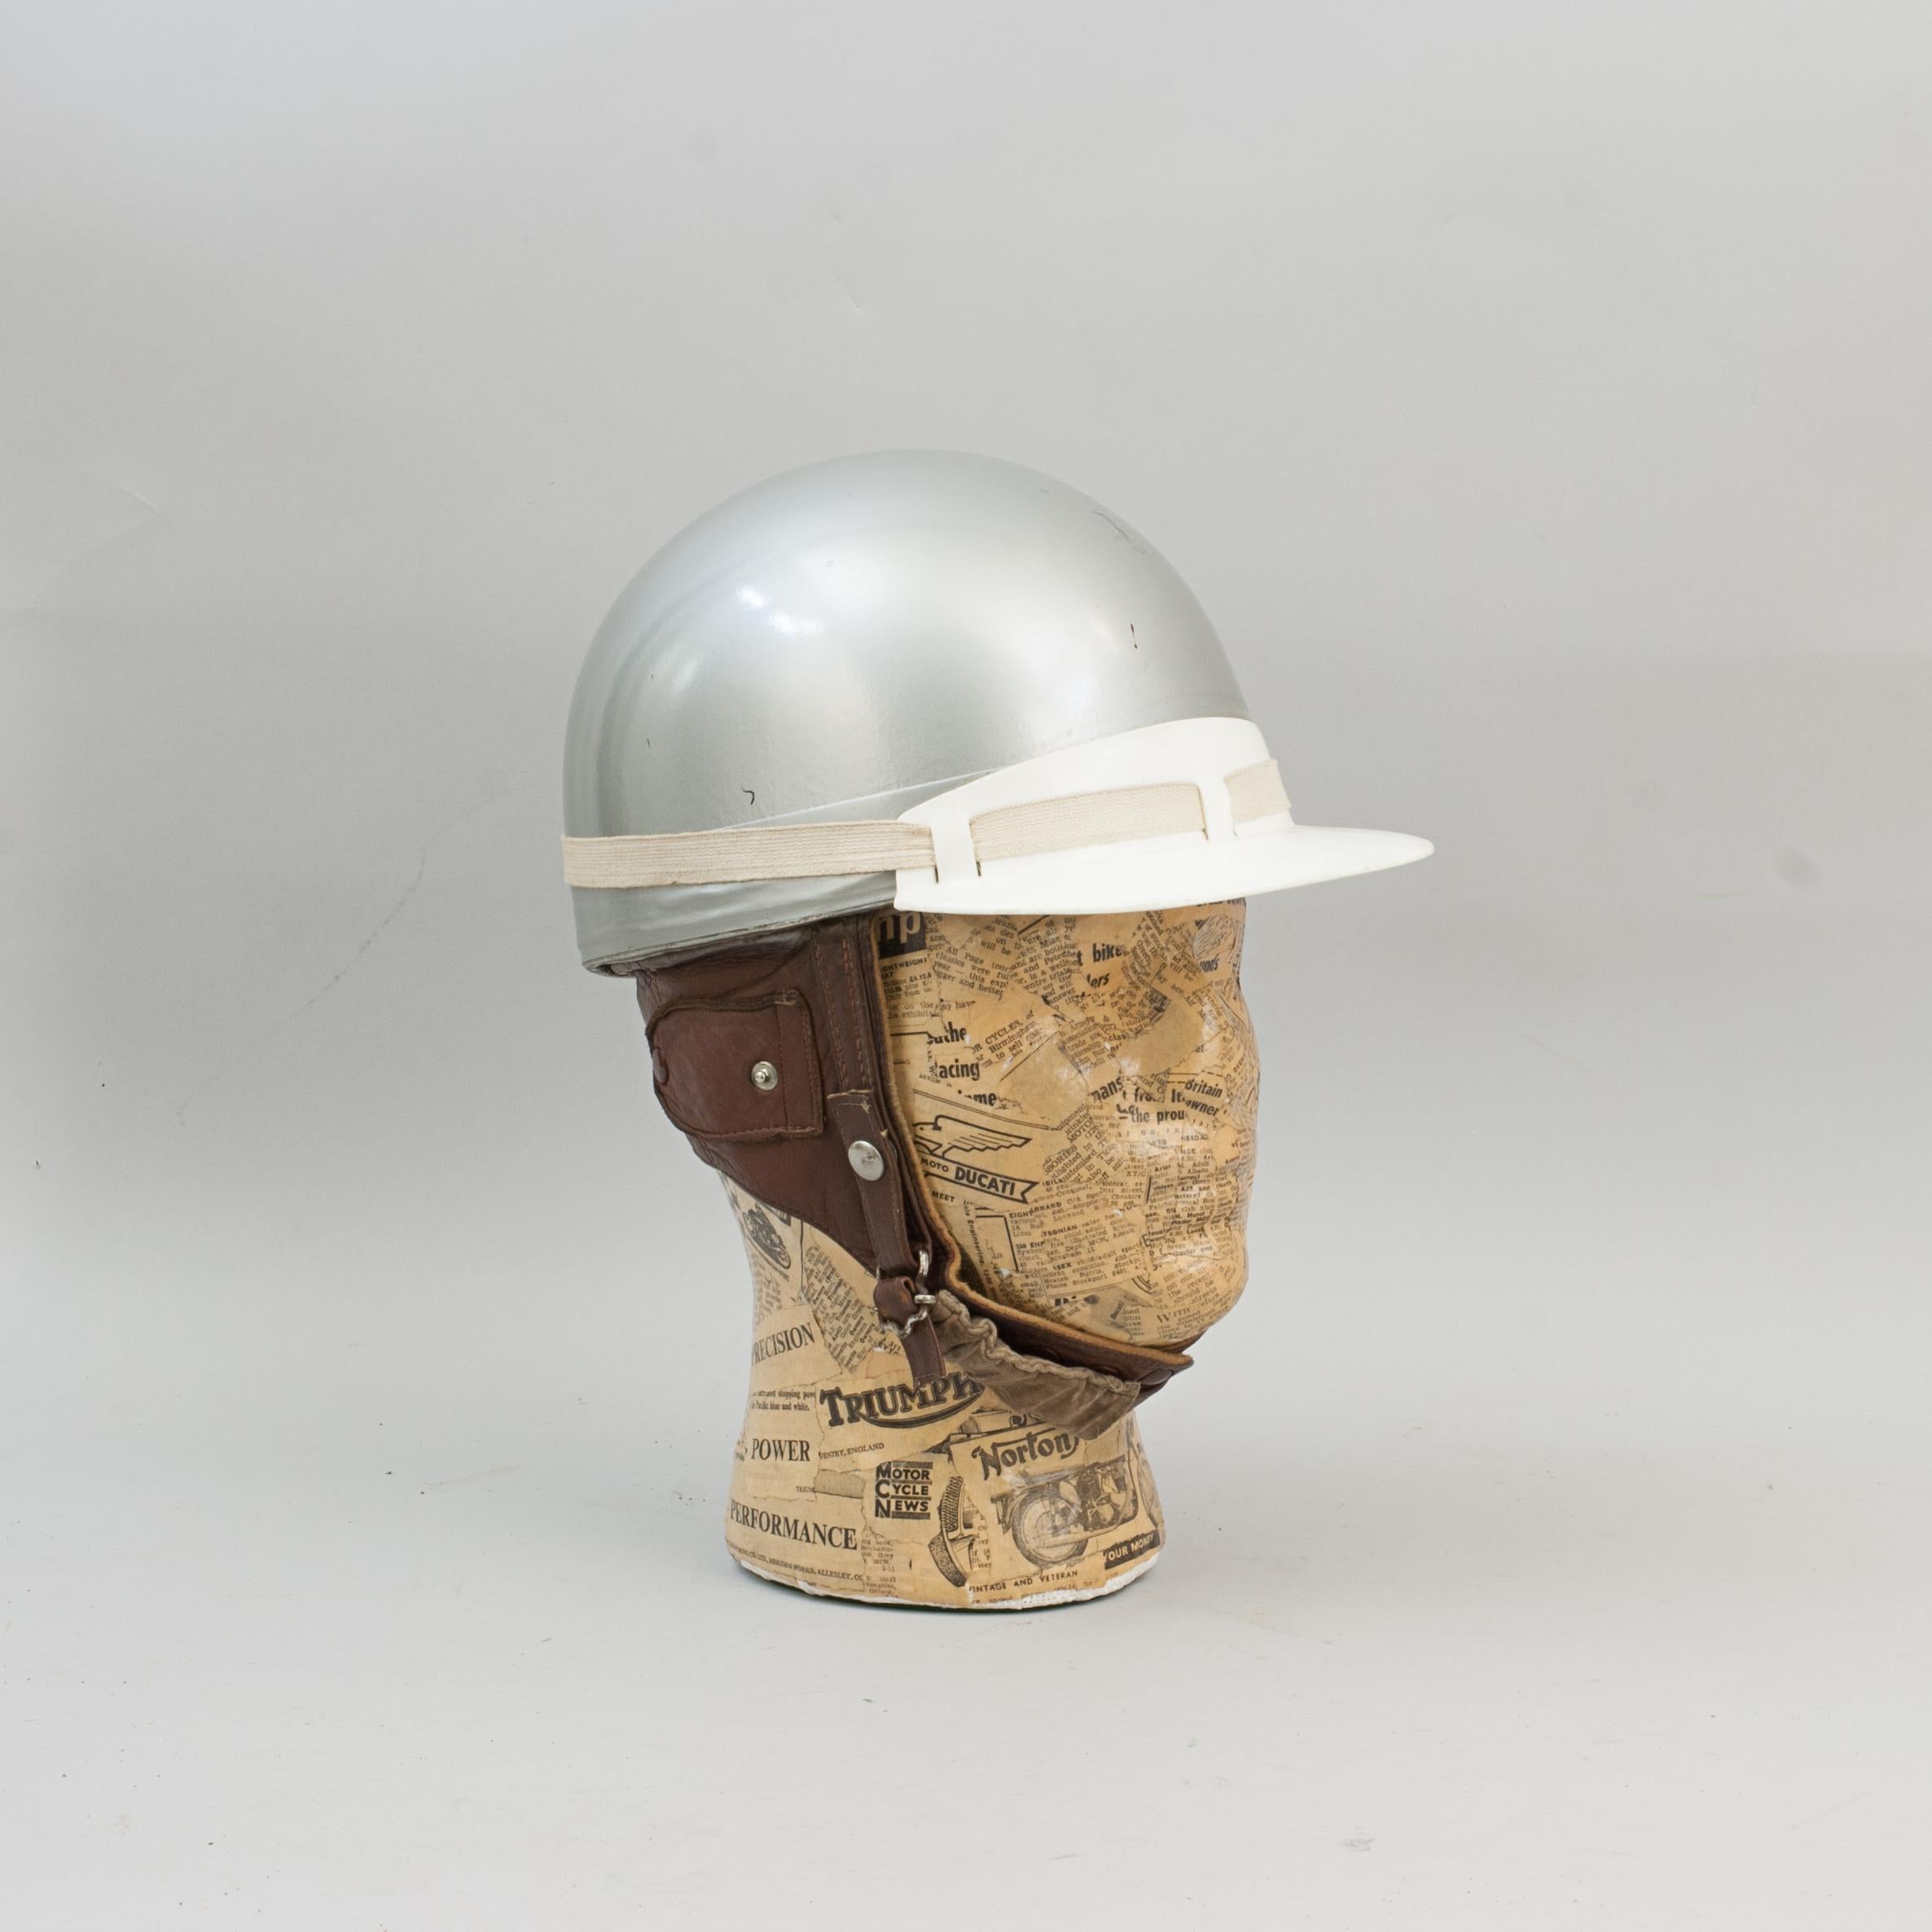 Vintage racing motorcycle crash helmet, Everoak.
A fine silver painted Motorcycle, Pudding basin shape helmet made in England by Everoak. This helmet has a cork interior, fitted with a leather headband and straps keeping a space between the head